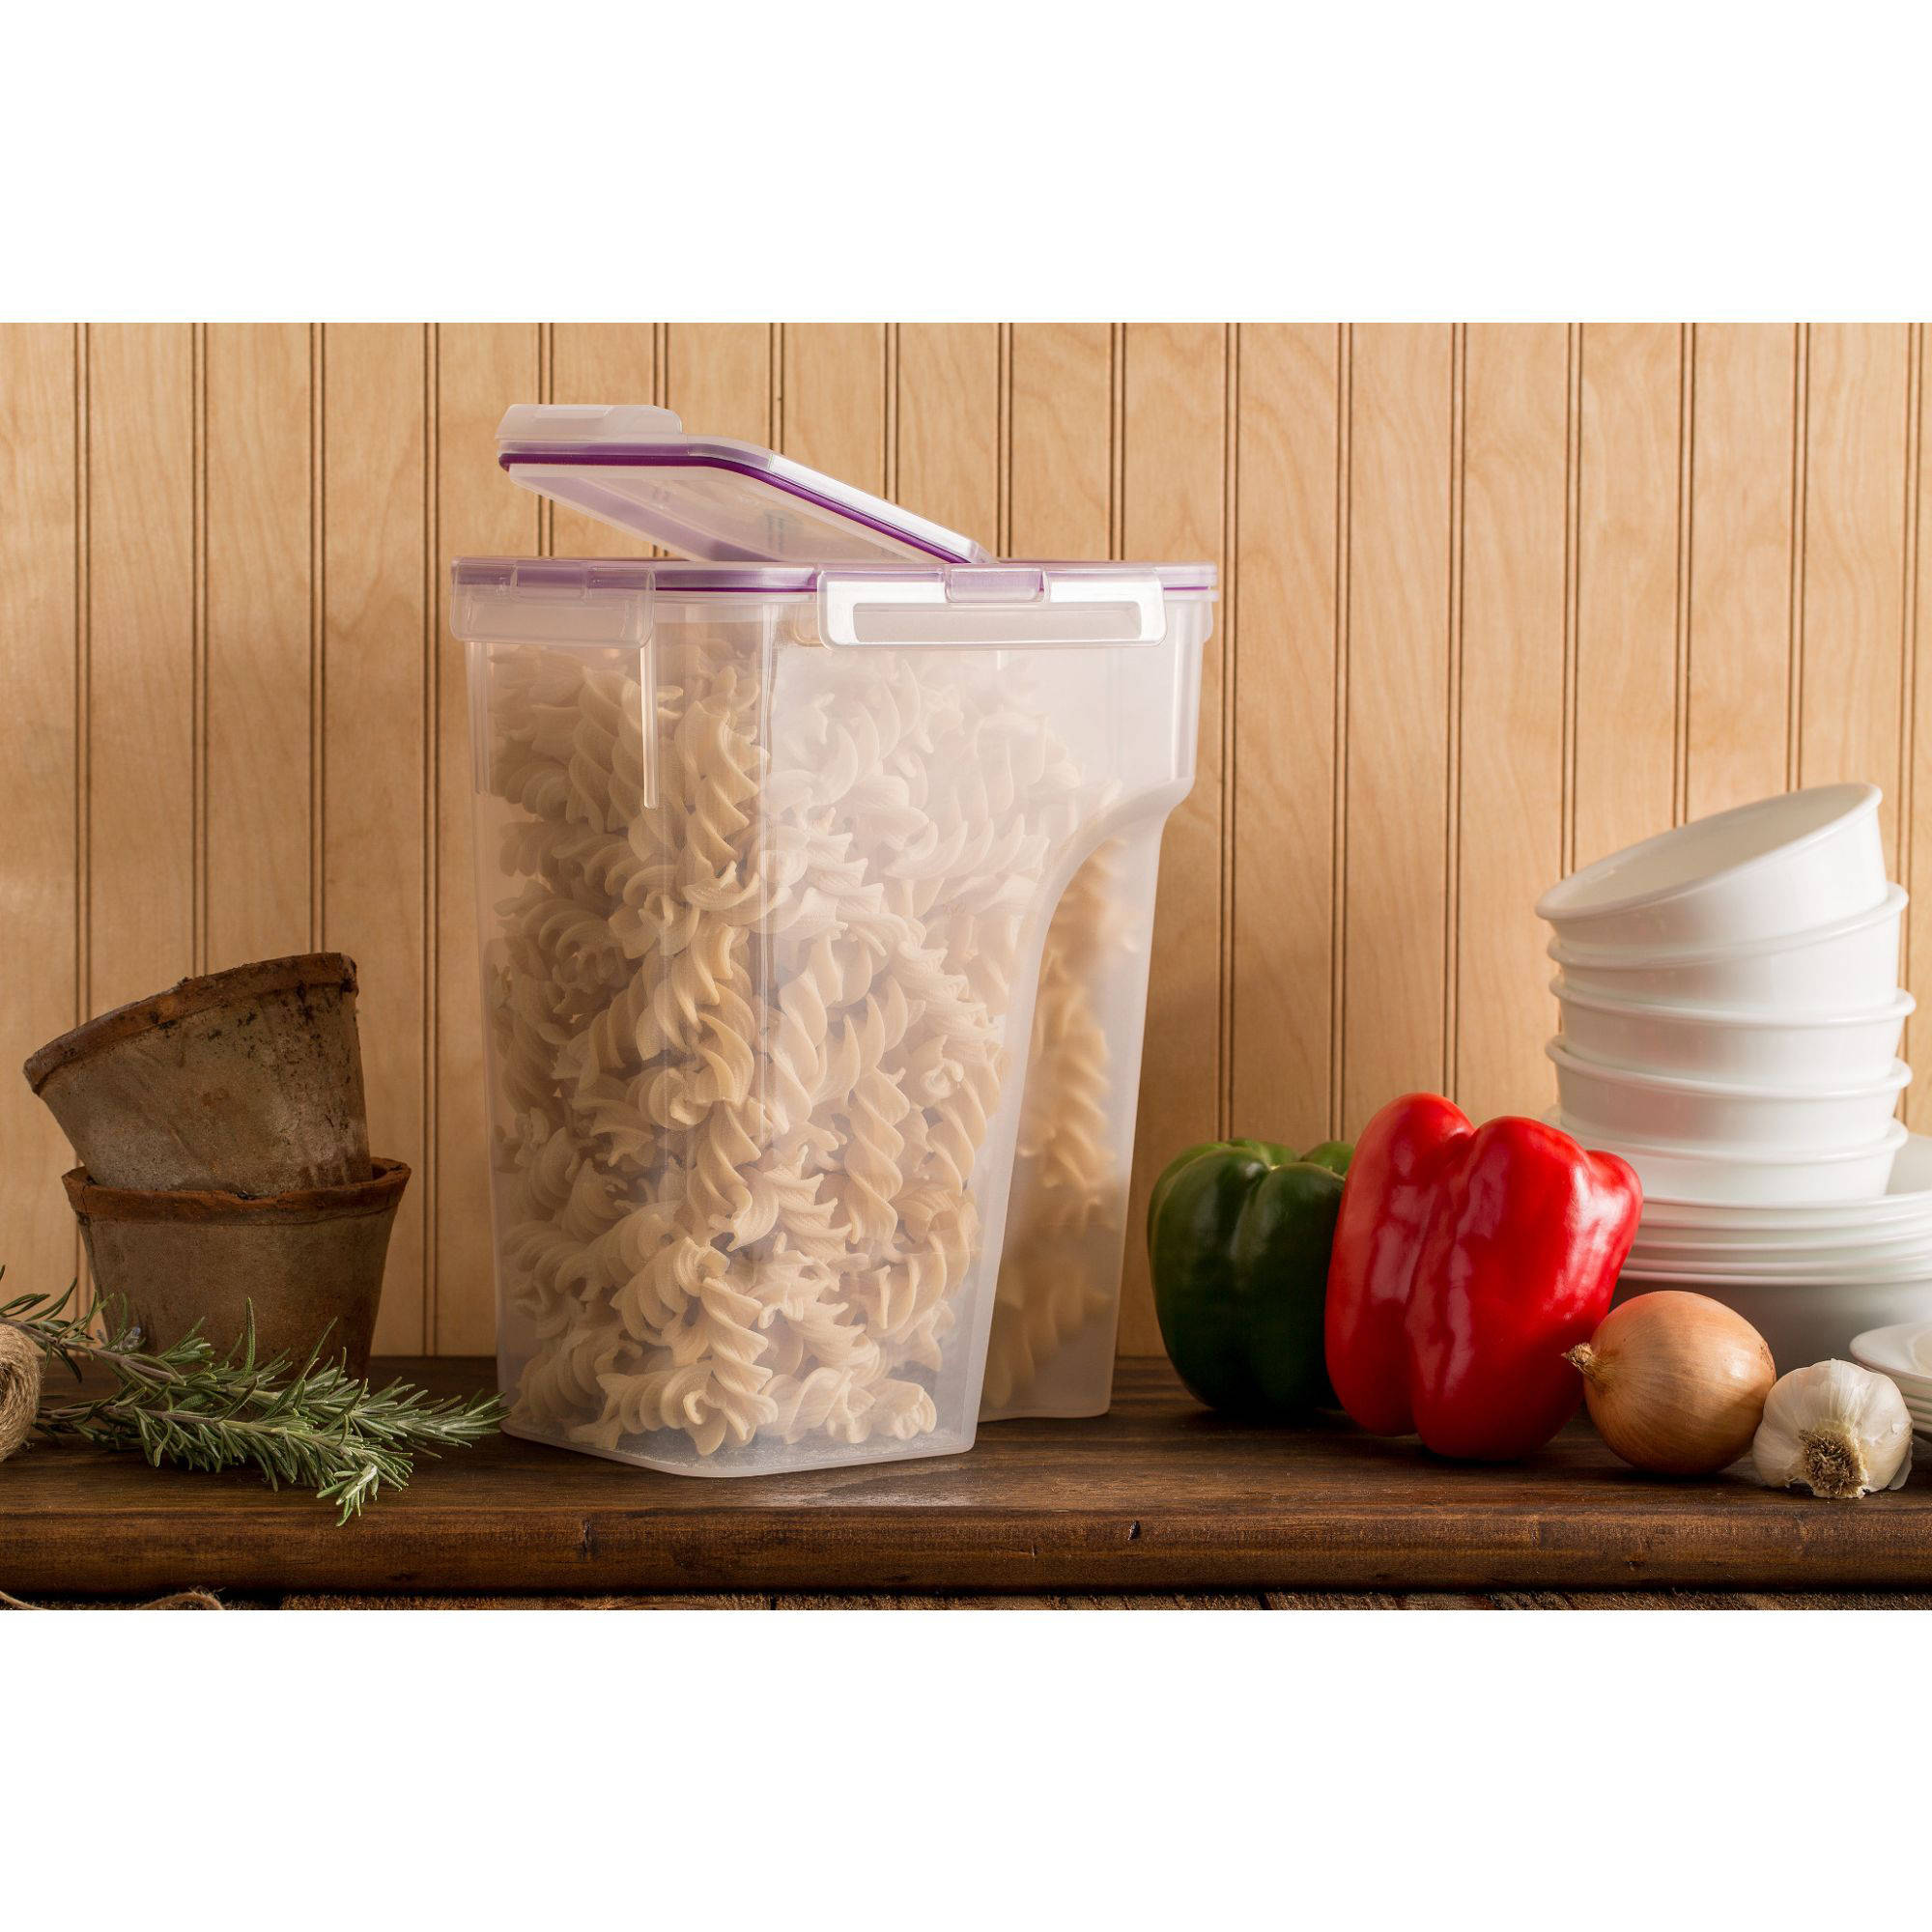 Snapware Airtight Food Storage 22.8-Cup Container with Fliptop Lid, Set of 4 - image 3 of 4